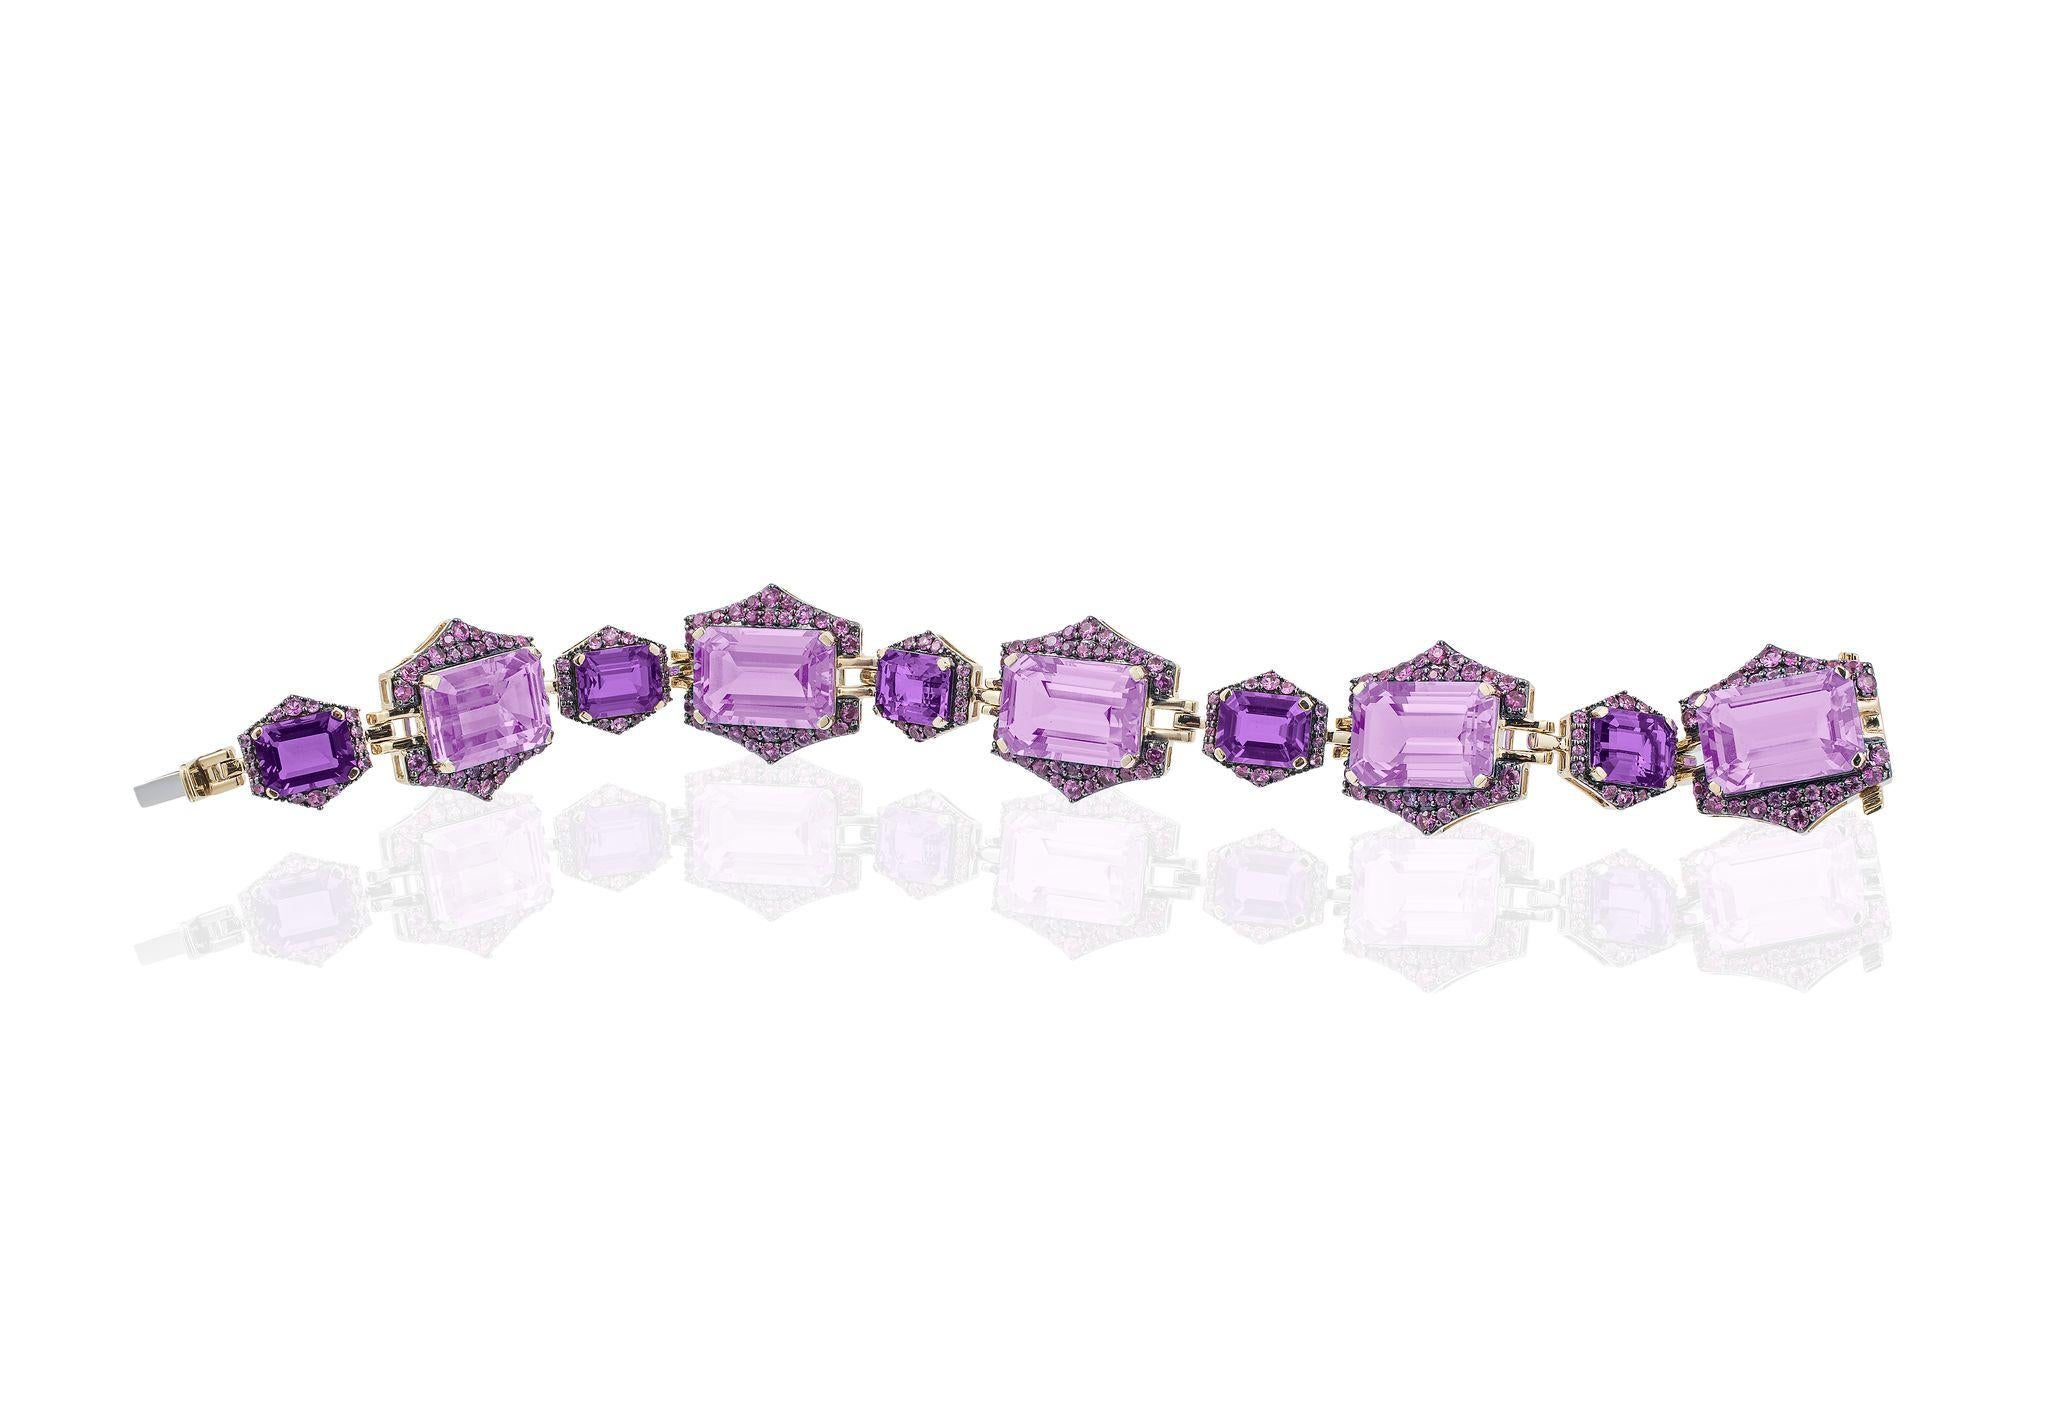 Amethyst and Lavender Amethyst with Pink Sapphire Bracelet In 18K Yellow Gold and Light Black Rhodium, from 'Rain Forest' Collection
Stone Size 10x15-9x7, 
Bracelet Length: 6 3/4''
Gemstone Approx. Wt.: Lavender Amethyst- 33.82 Carats
              